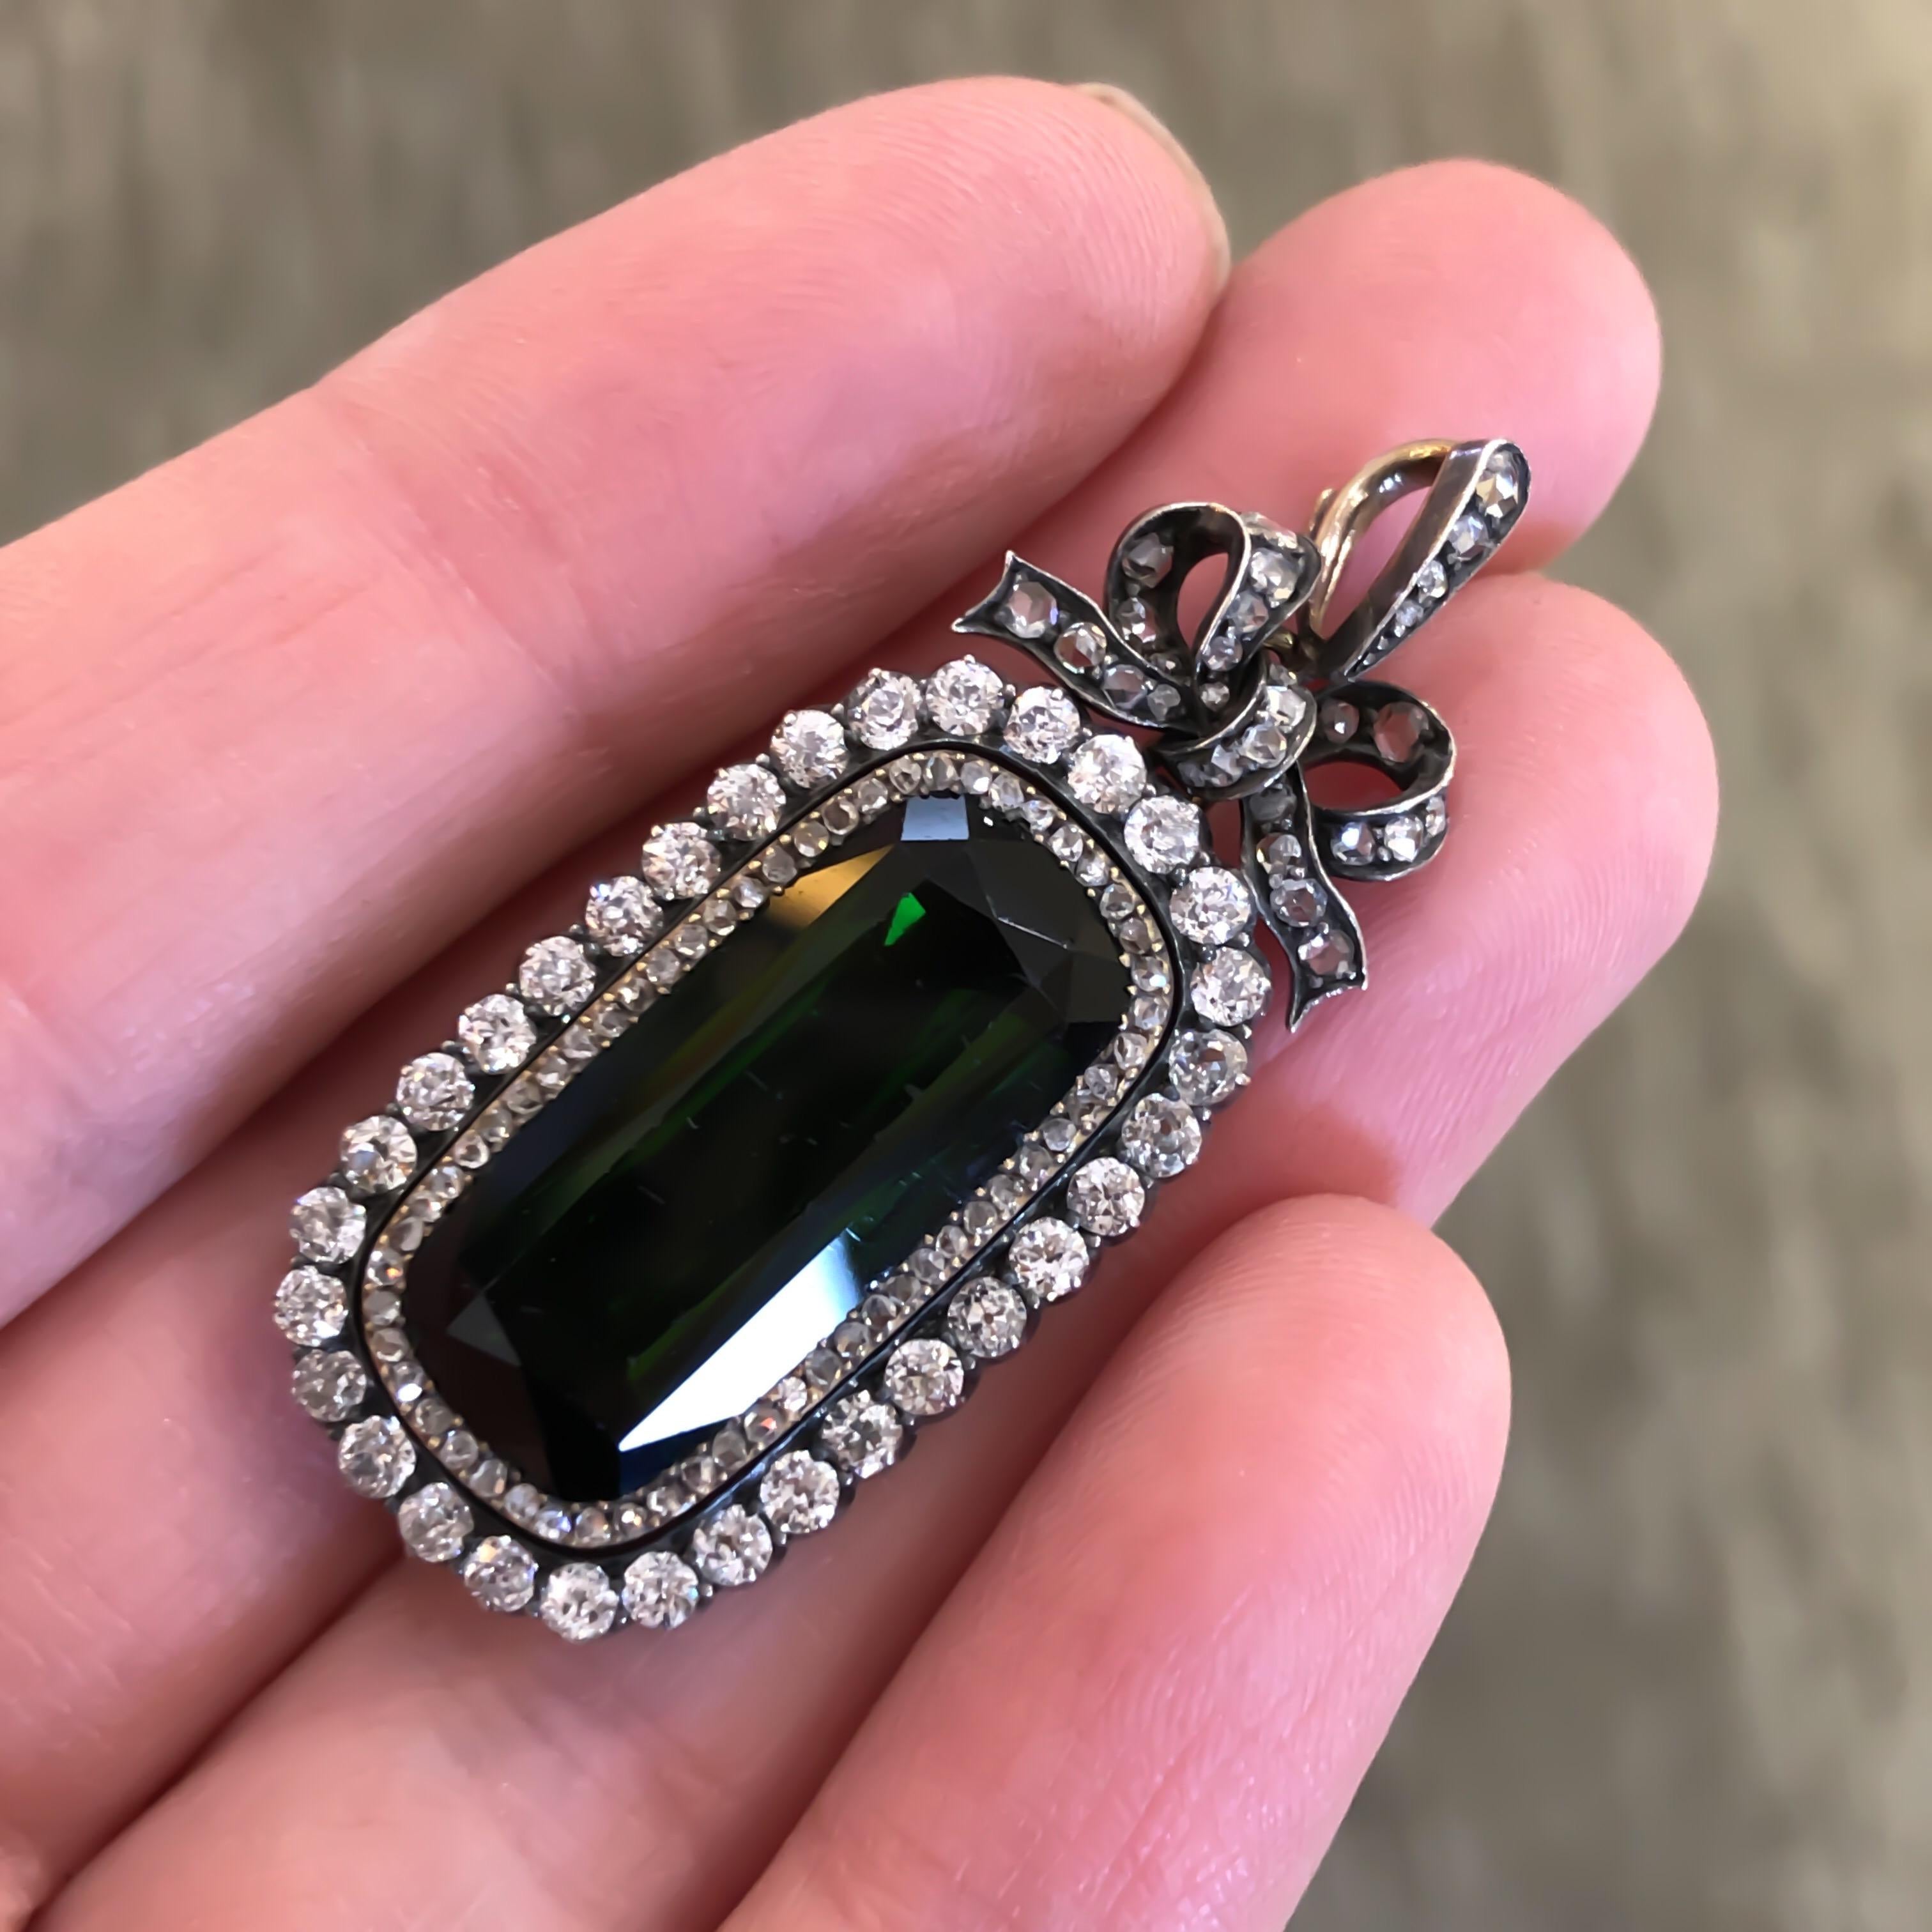 Antique Russian pendant/brooch made in 18K yellow gold and silver.  Two rows of old mine cut diamonds circle one elongated oval scissor cut green Tourmaline, they also decorate a bow and bail at the top. The bow and bail are removable. The